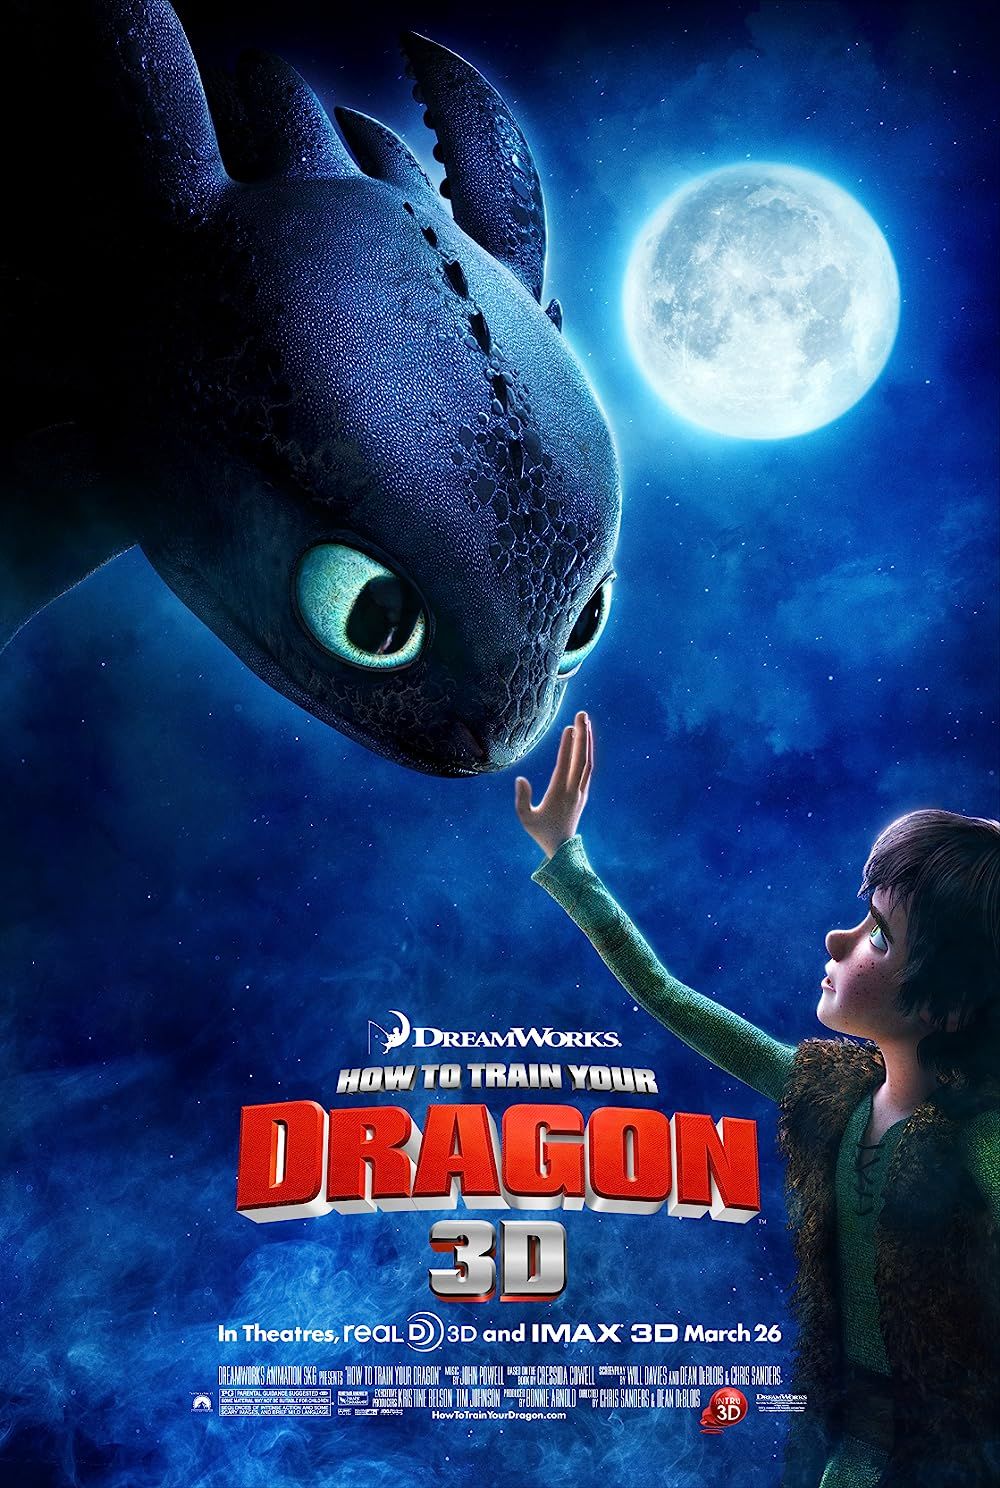 Poster for How to Train Your Dragon with Hiccup about to touch Toothless